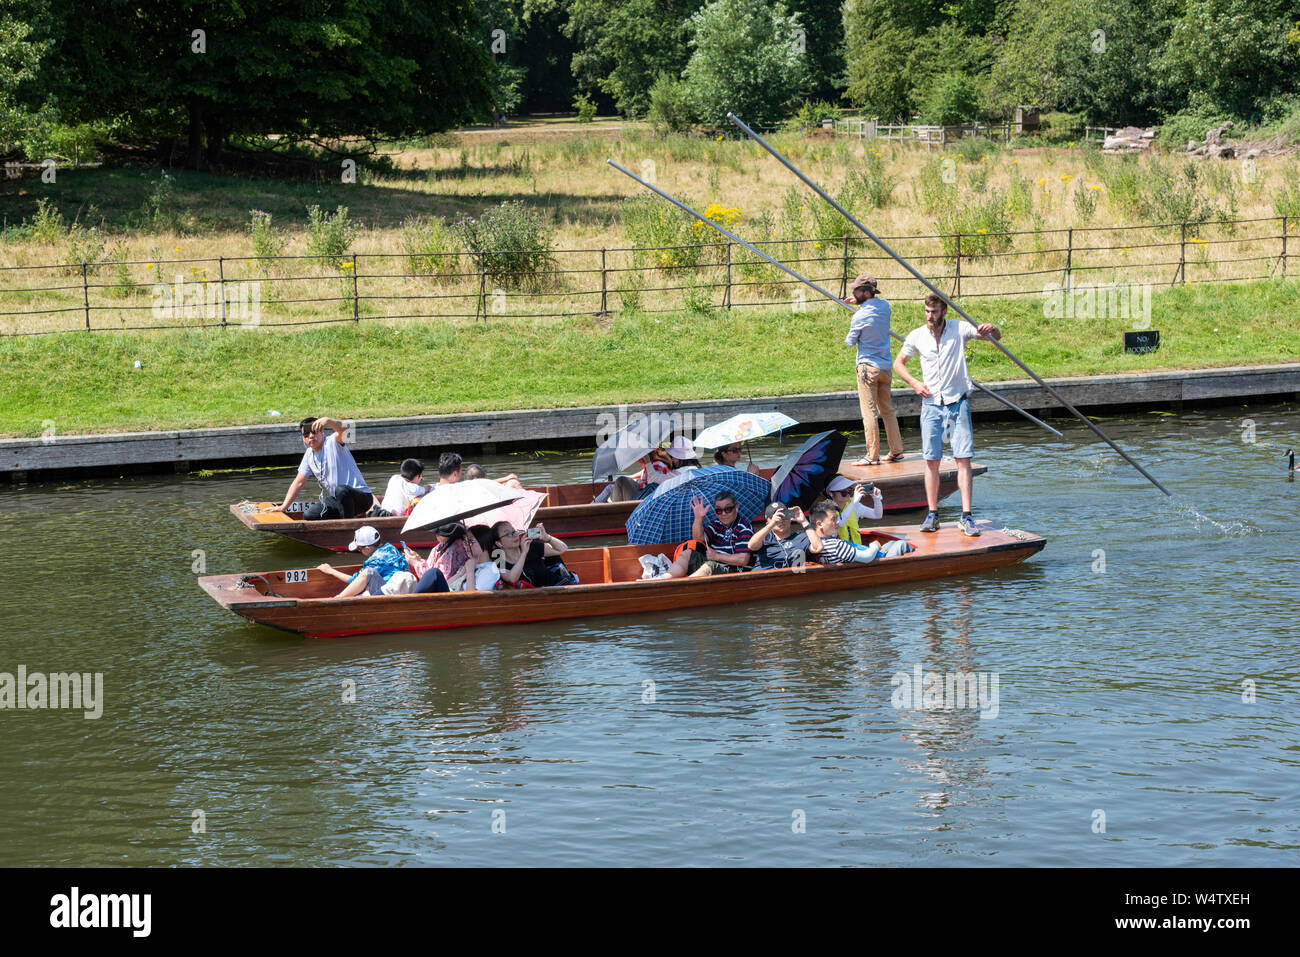 Cambridge UK,  25th July 2019. People enjoy punting on the River Cam on what is likely to be the hottest day on record in the UK.  With temperatures in the high 30’s centigrade tourists avoid the glaring sunshine under parasols and umbrellas. The temperature is set to rise to round 39 degrees as the heatwave in the south east of the UK continues. Credit Julian Eales/Alamy Live News Stock Photo